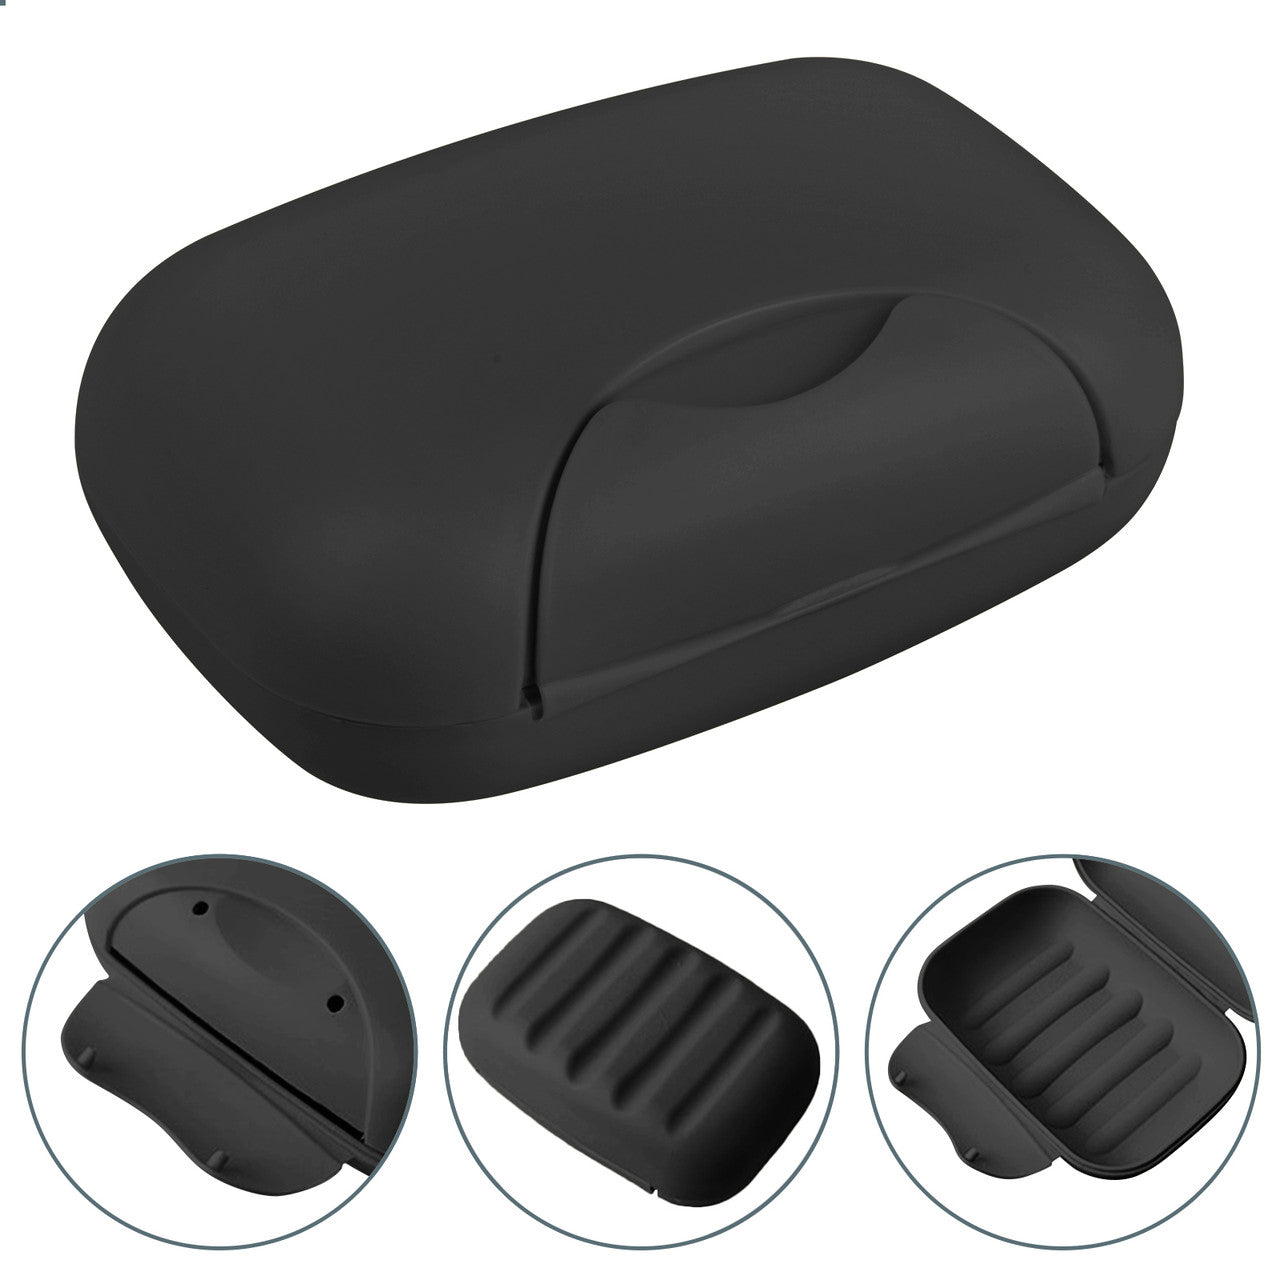 Soap Dish With Lock for Travel, Bathroom and Kitchen, Black